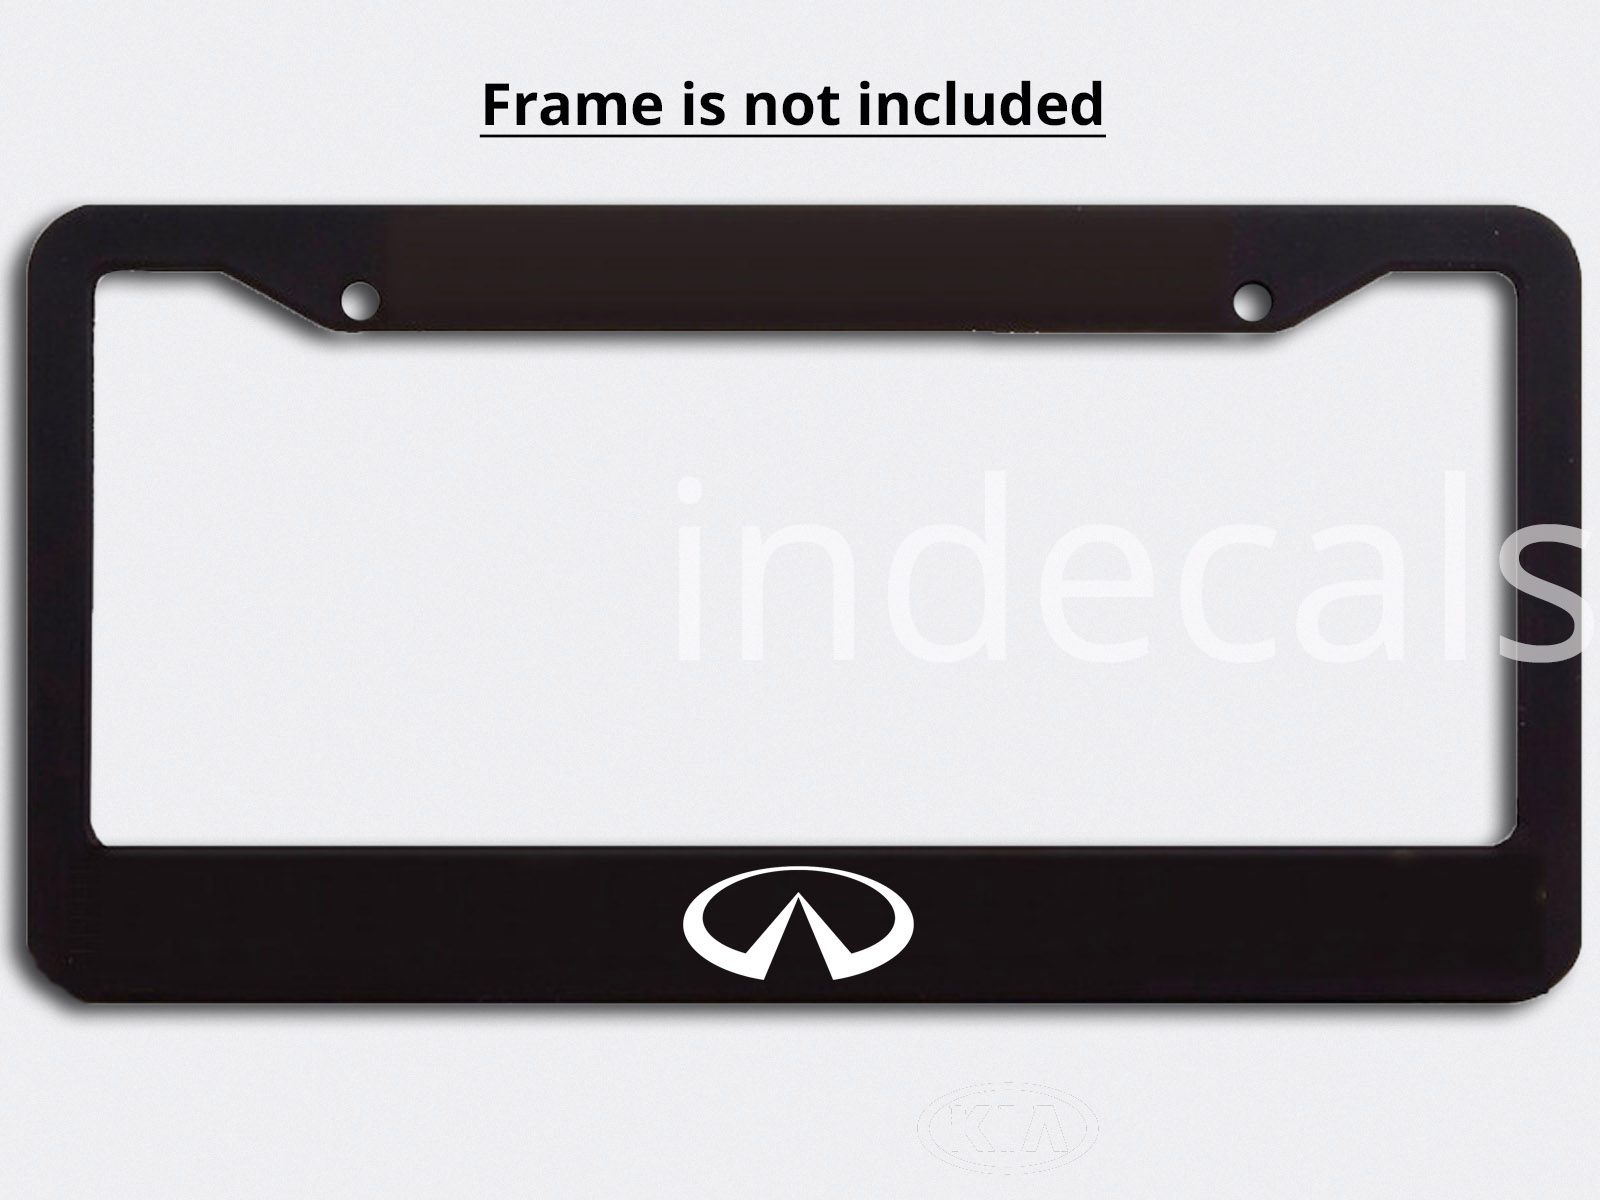 3 x Infiniti Stickers for License Plate Frame - White